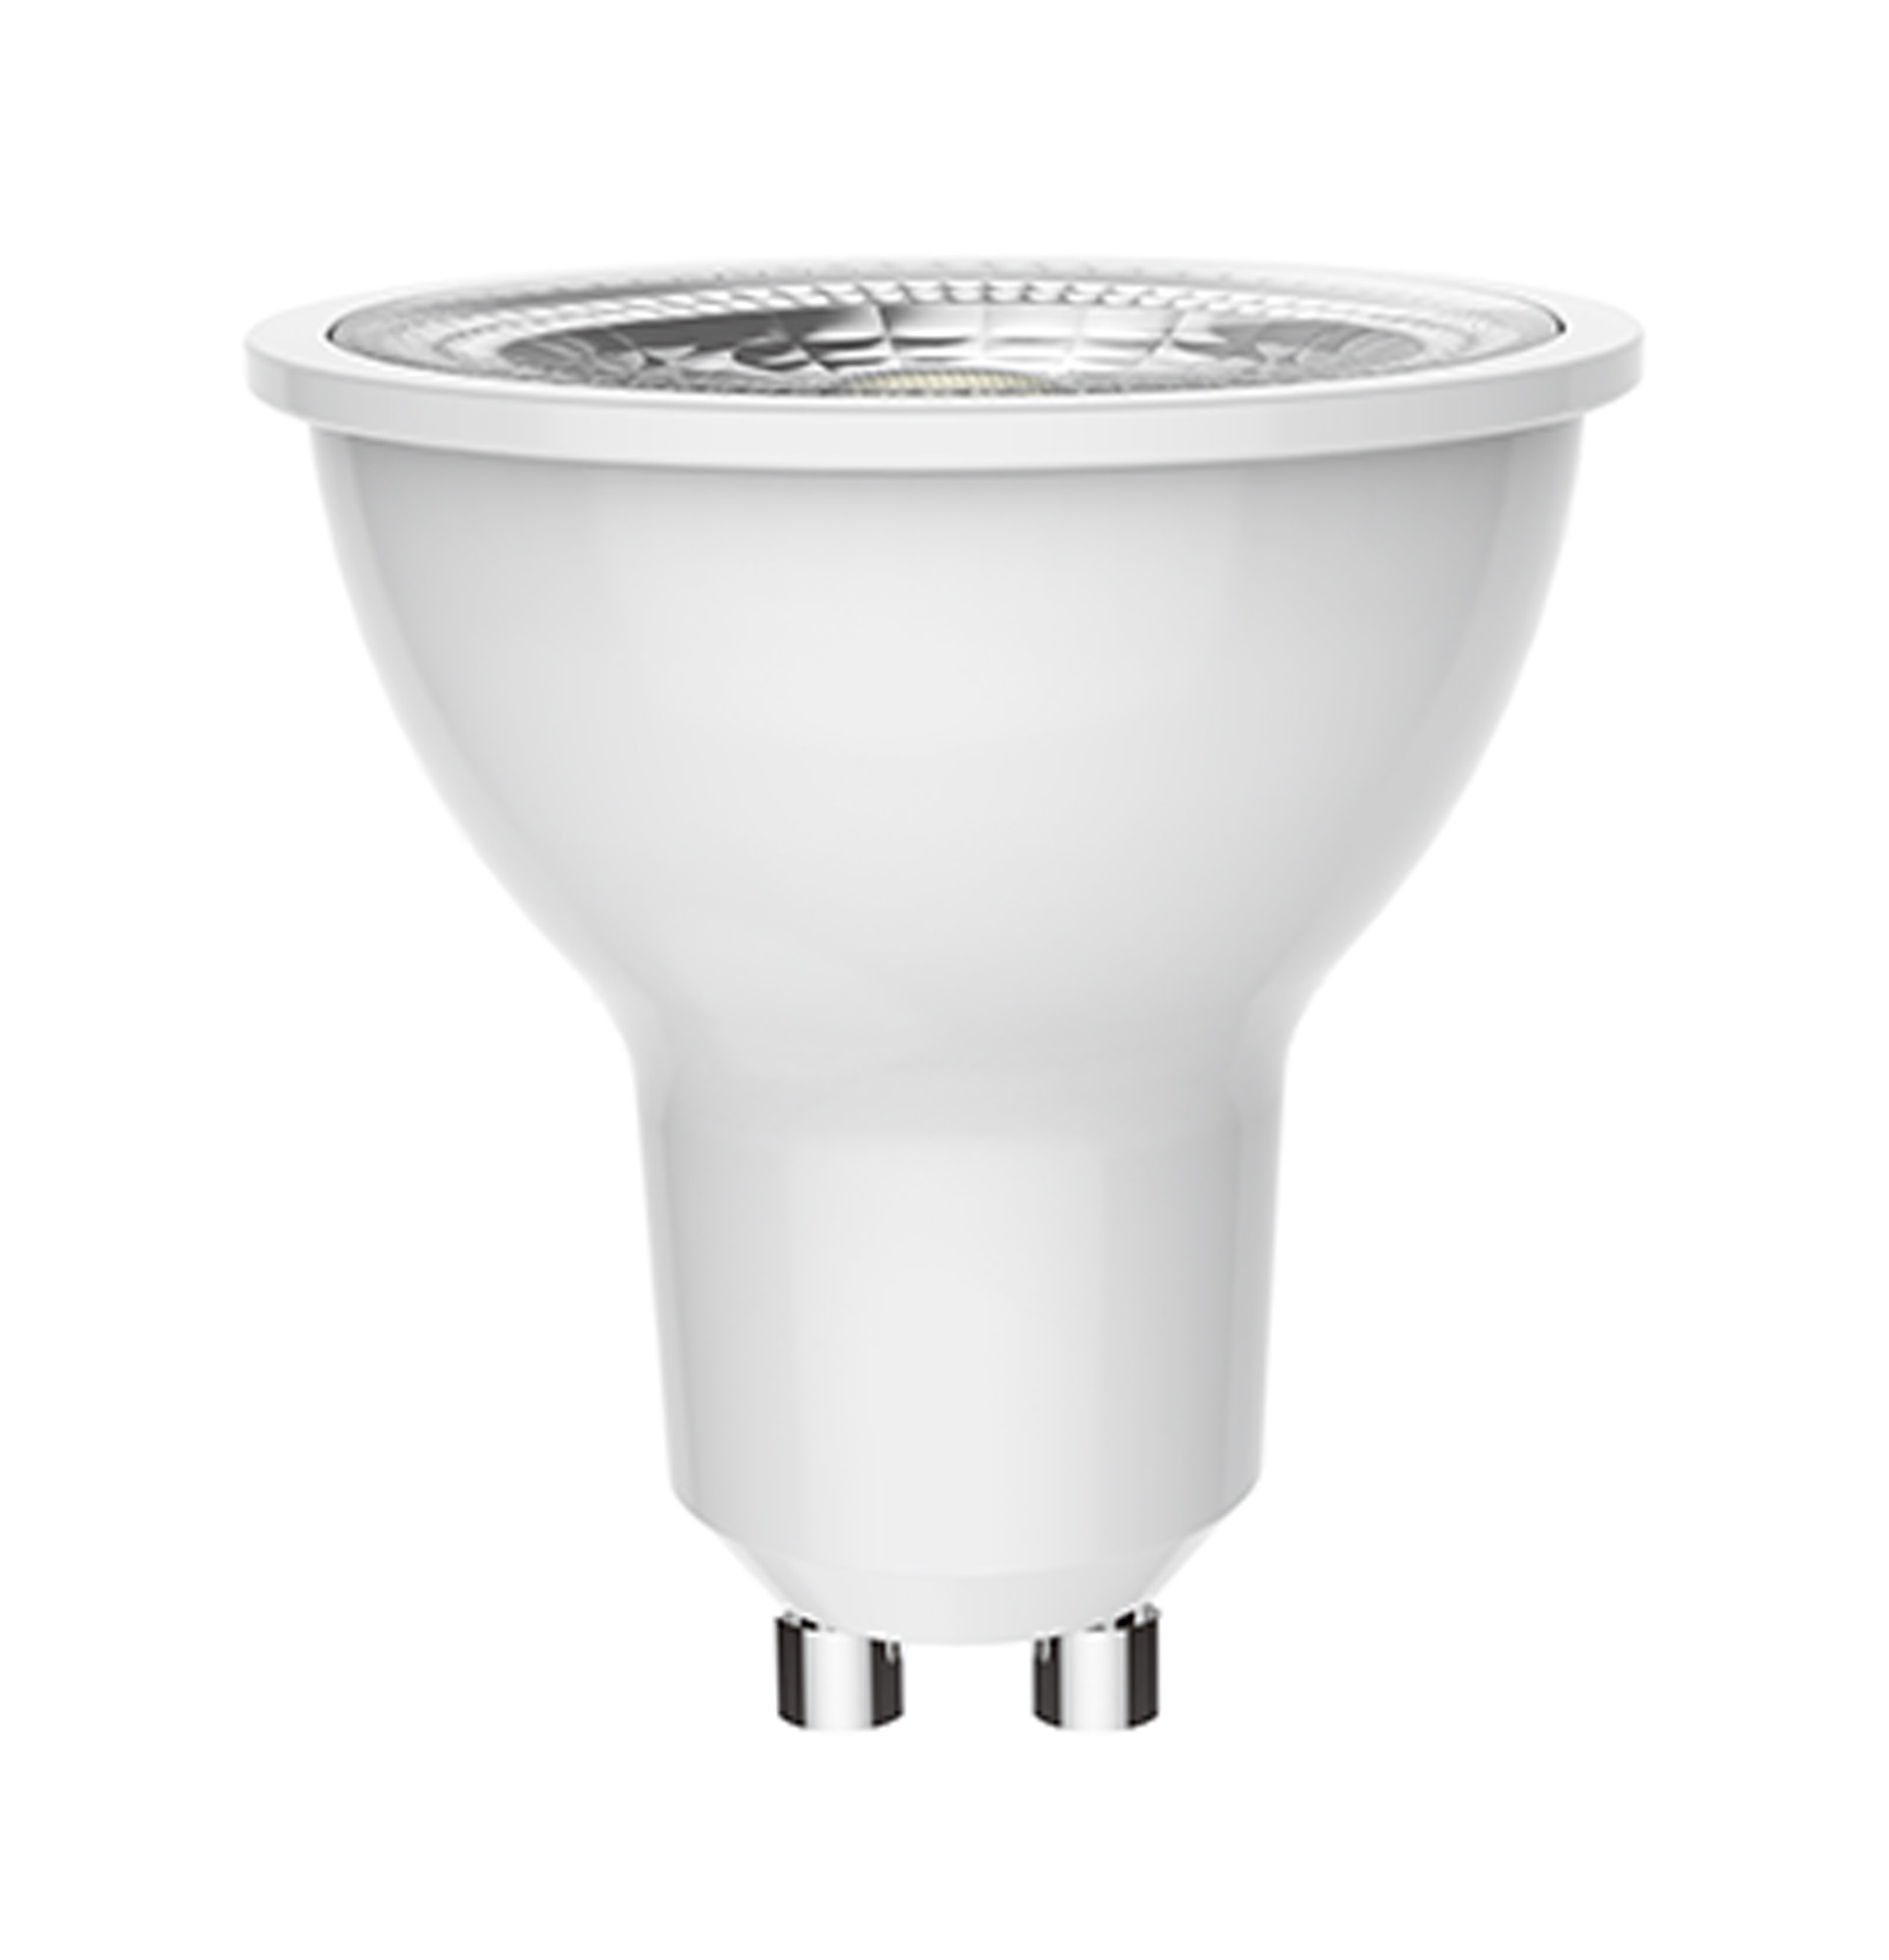 760442062  Focus LED GU10 Dimmable 5.5W 36° 4000K 500lm